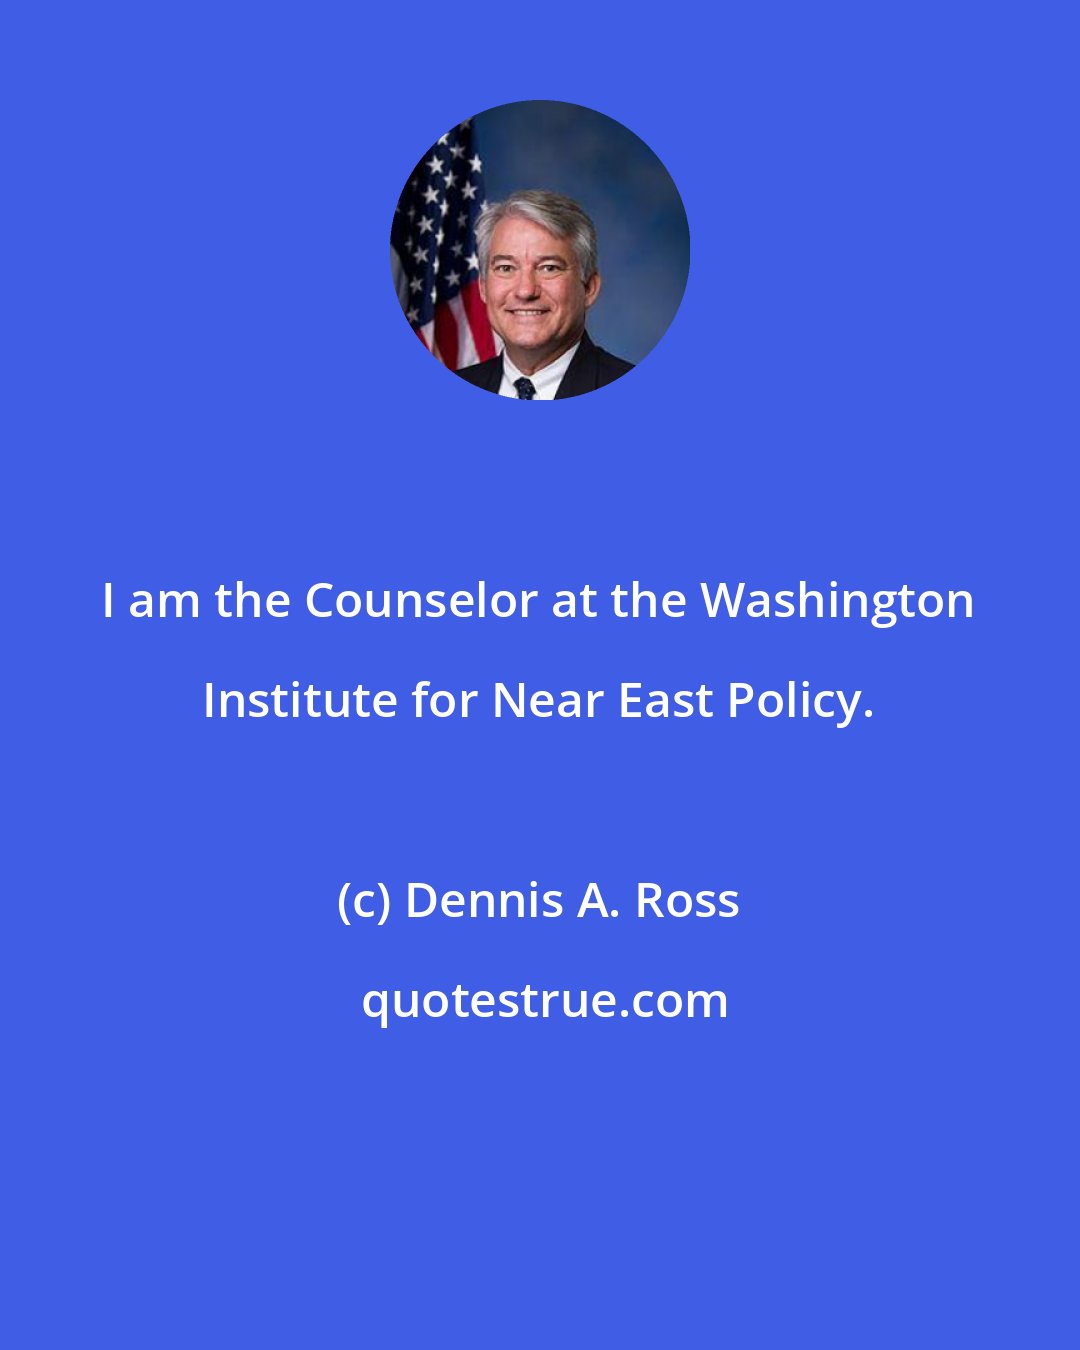 Dennis A. Ross: I am the Counselor at the Washington Institute for Near East Policy.